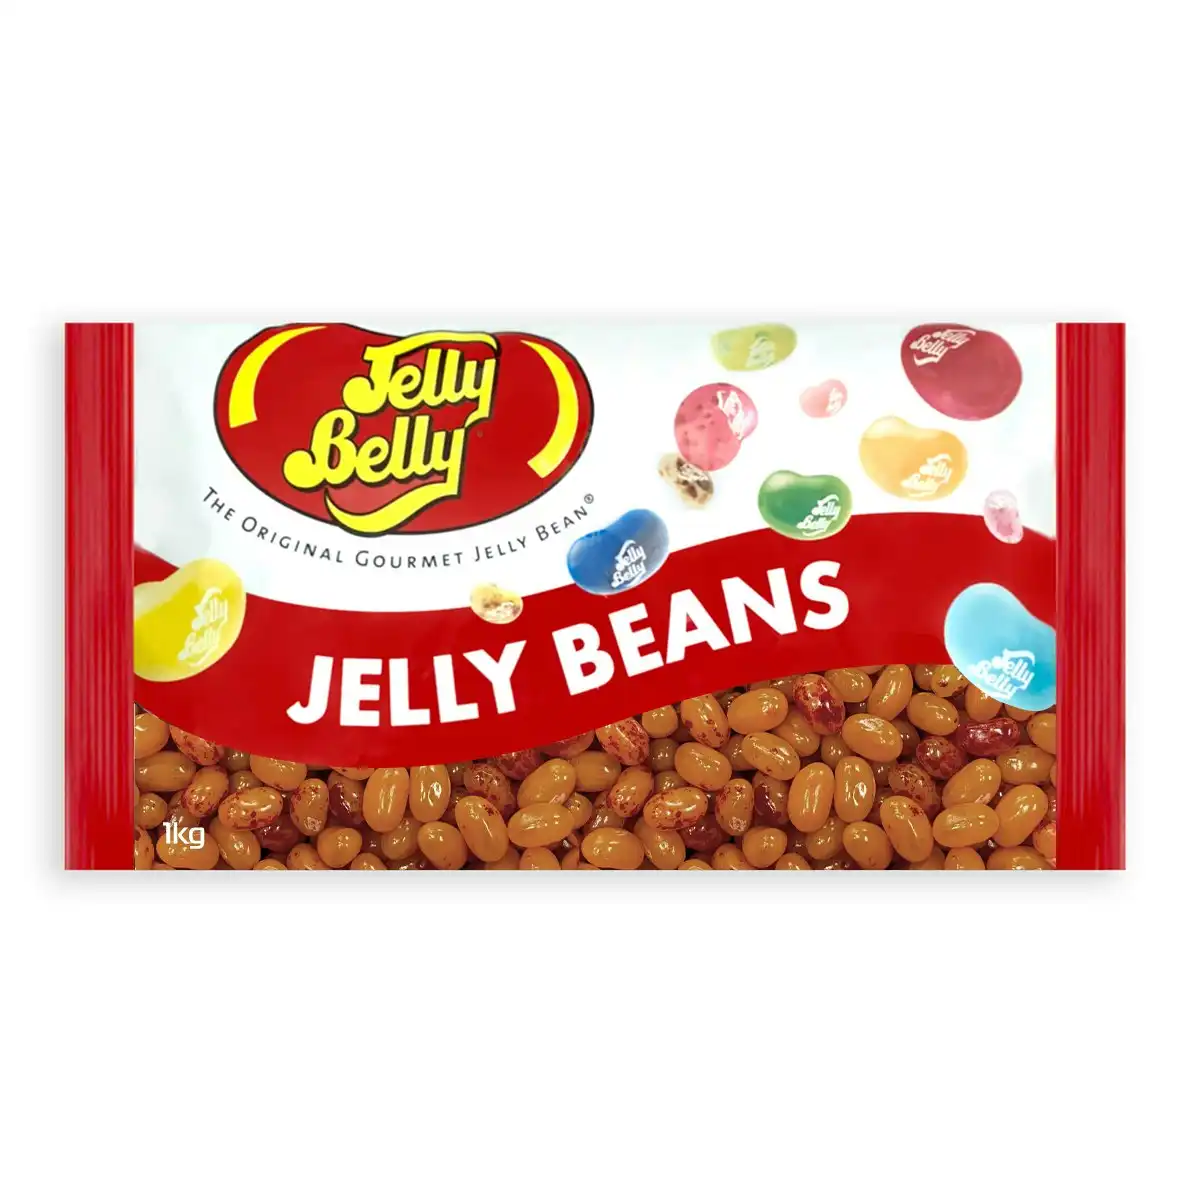 Jelly Belly Peach 1kg Jelly Bean Bag Chewy Sweet Confectionery Candy/Lollies